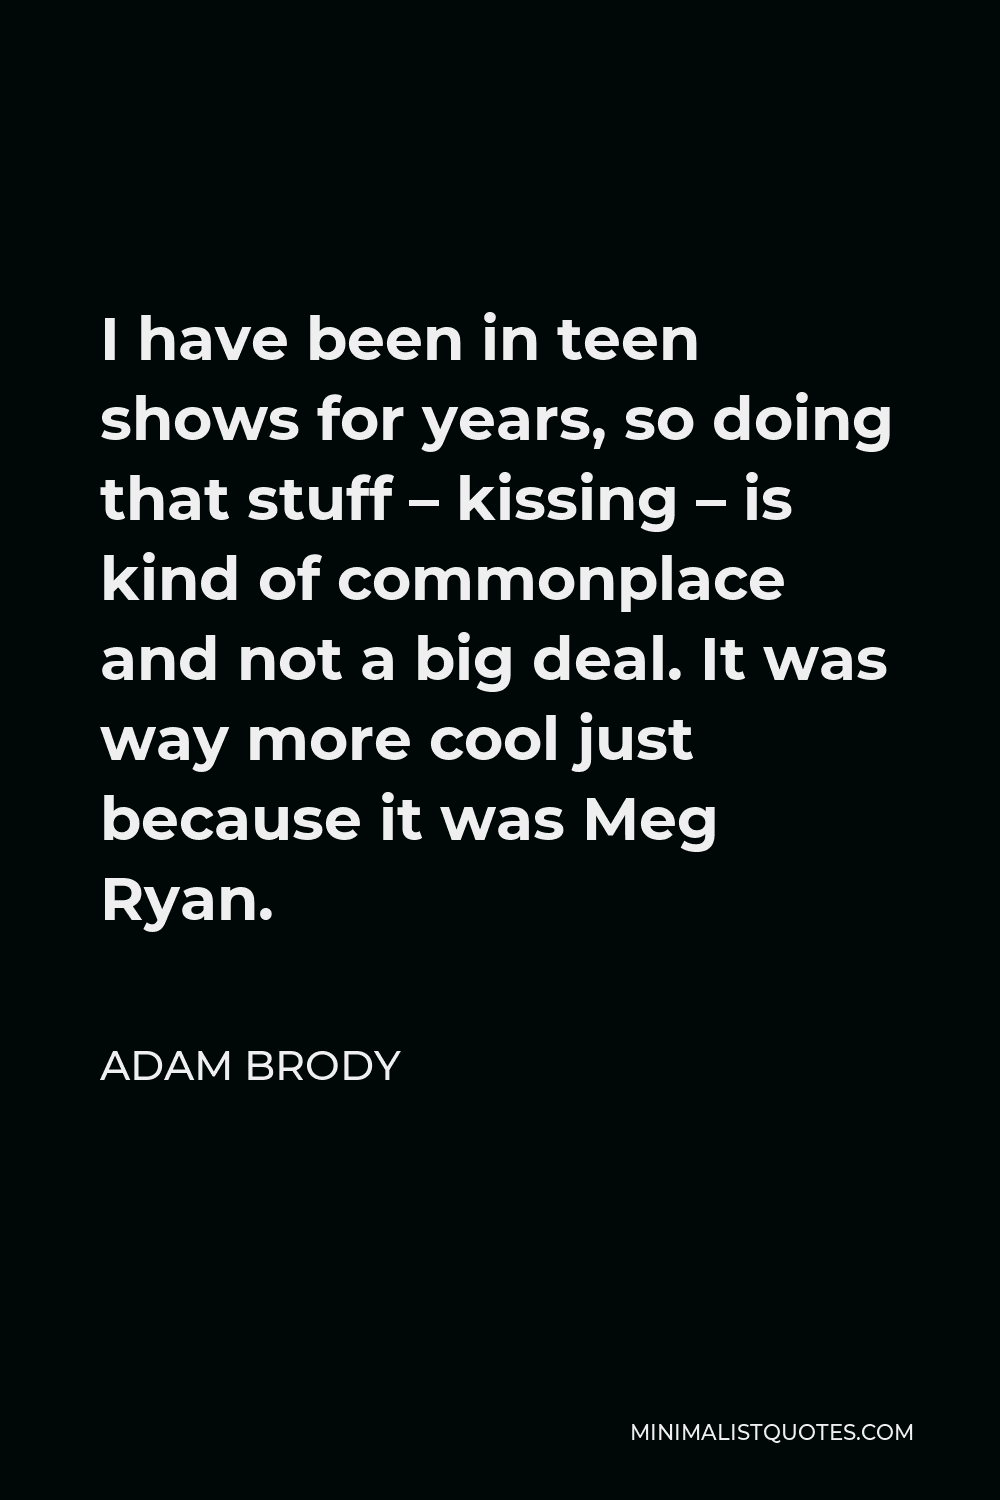 Adam Brody Quote - I have been in teen shows for years, so doing that stuff – kissing – is kind of commonplace and not a big deal. It was way more cool just because it was Meg Ryan.